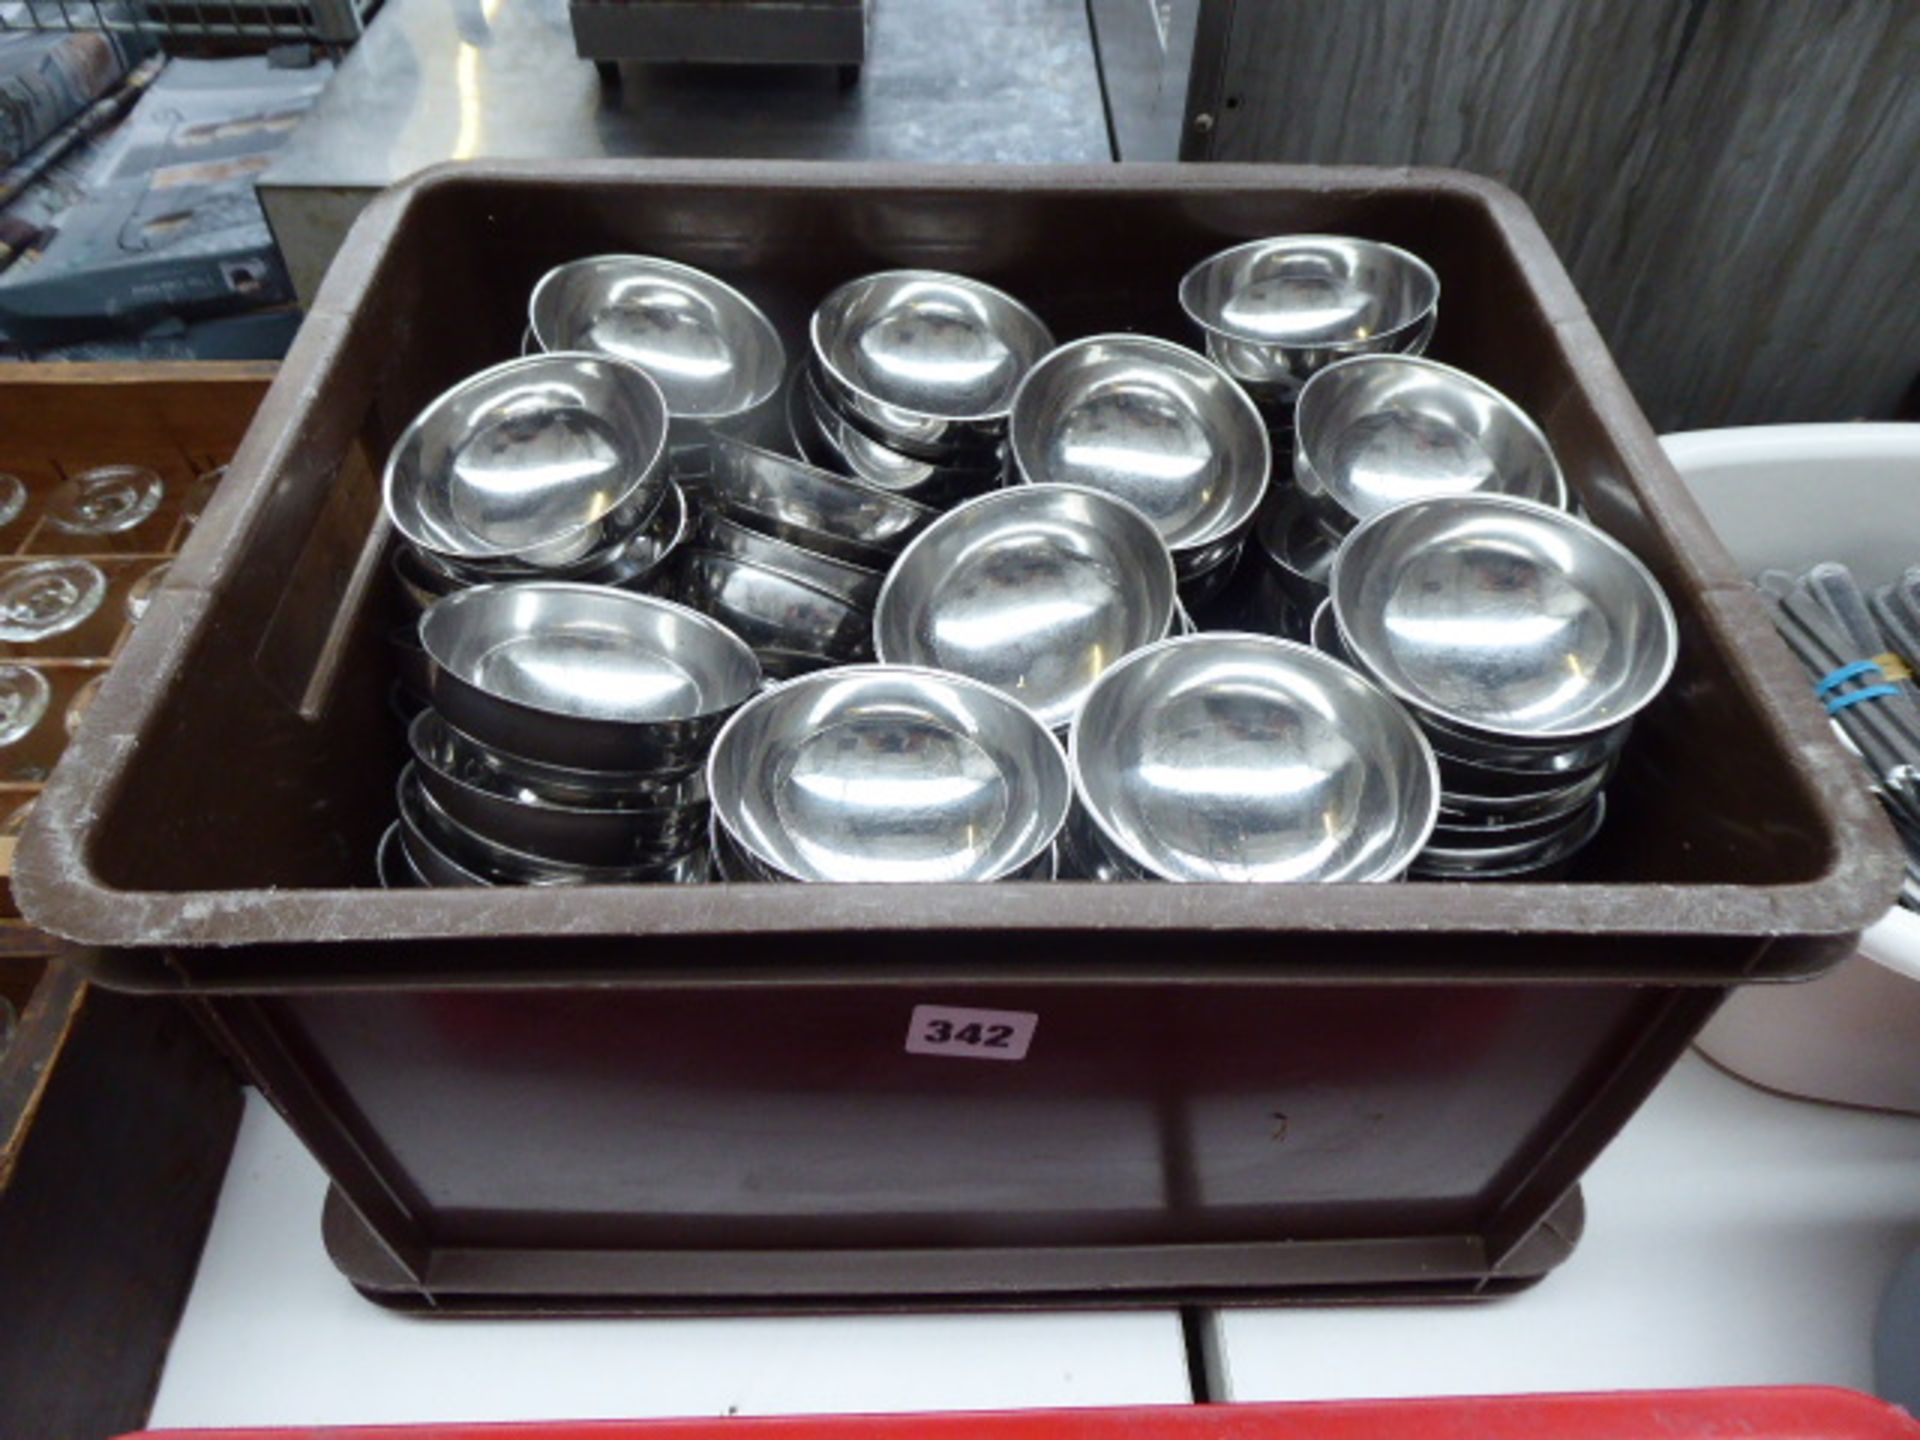 Box containing a large qty of stainless steel ice cream scoop bowls